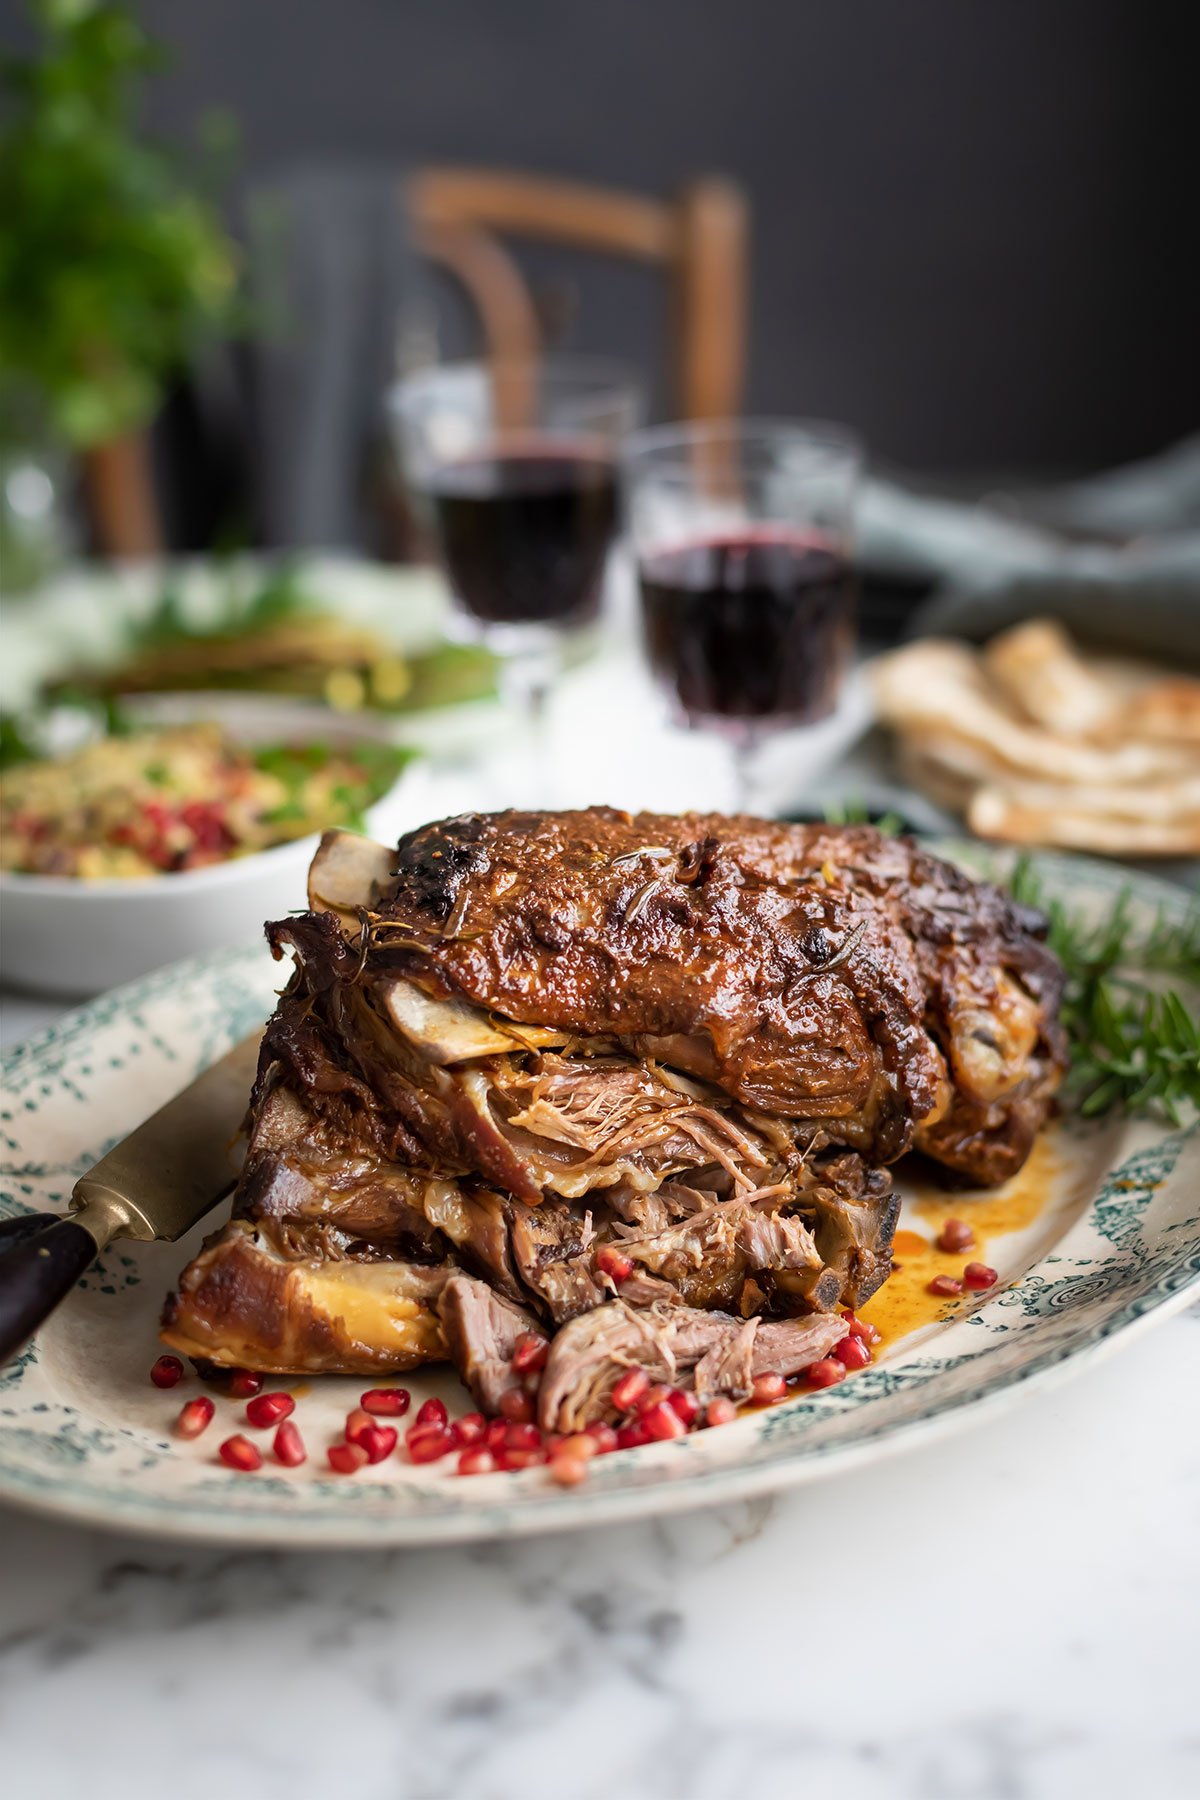 A recipe for slow-roasted shoulder of lamb with harissa & garlic